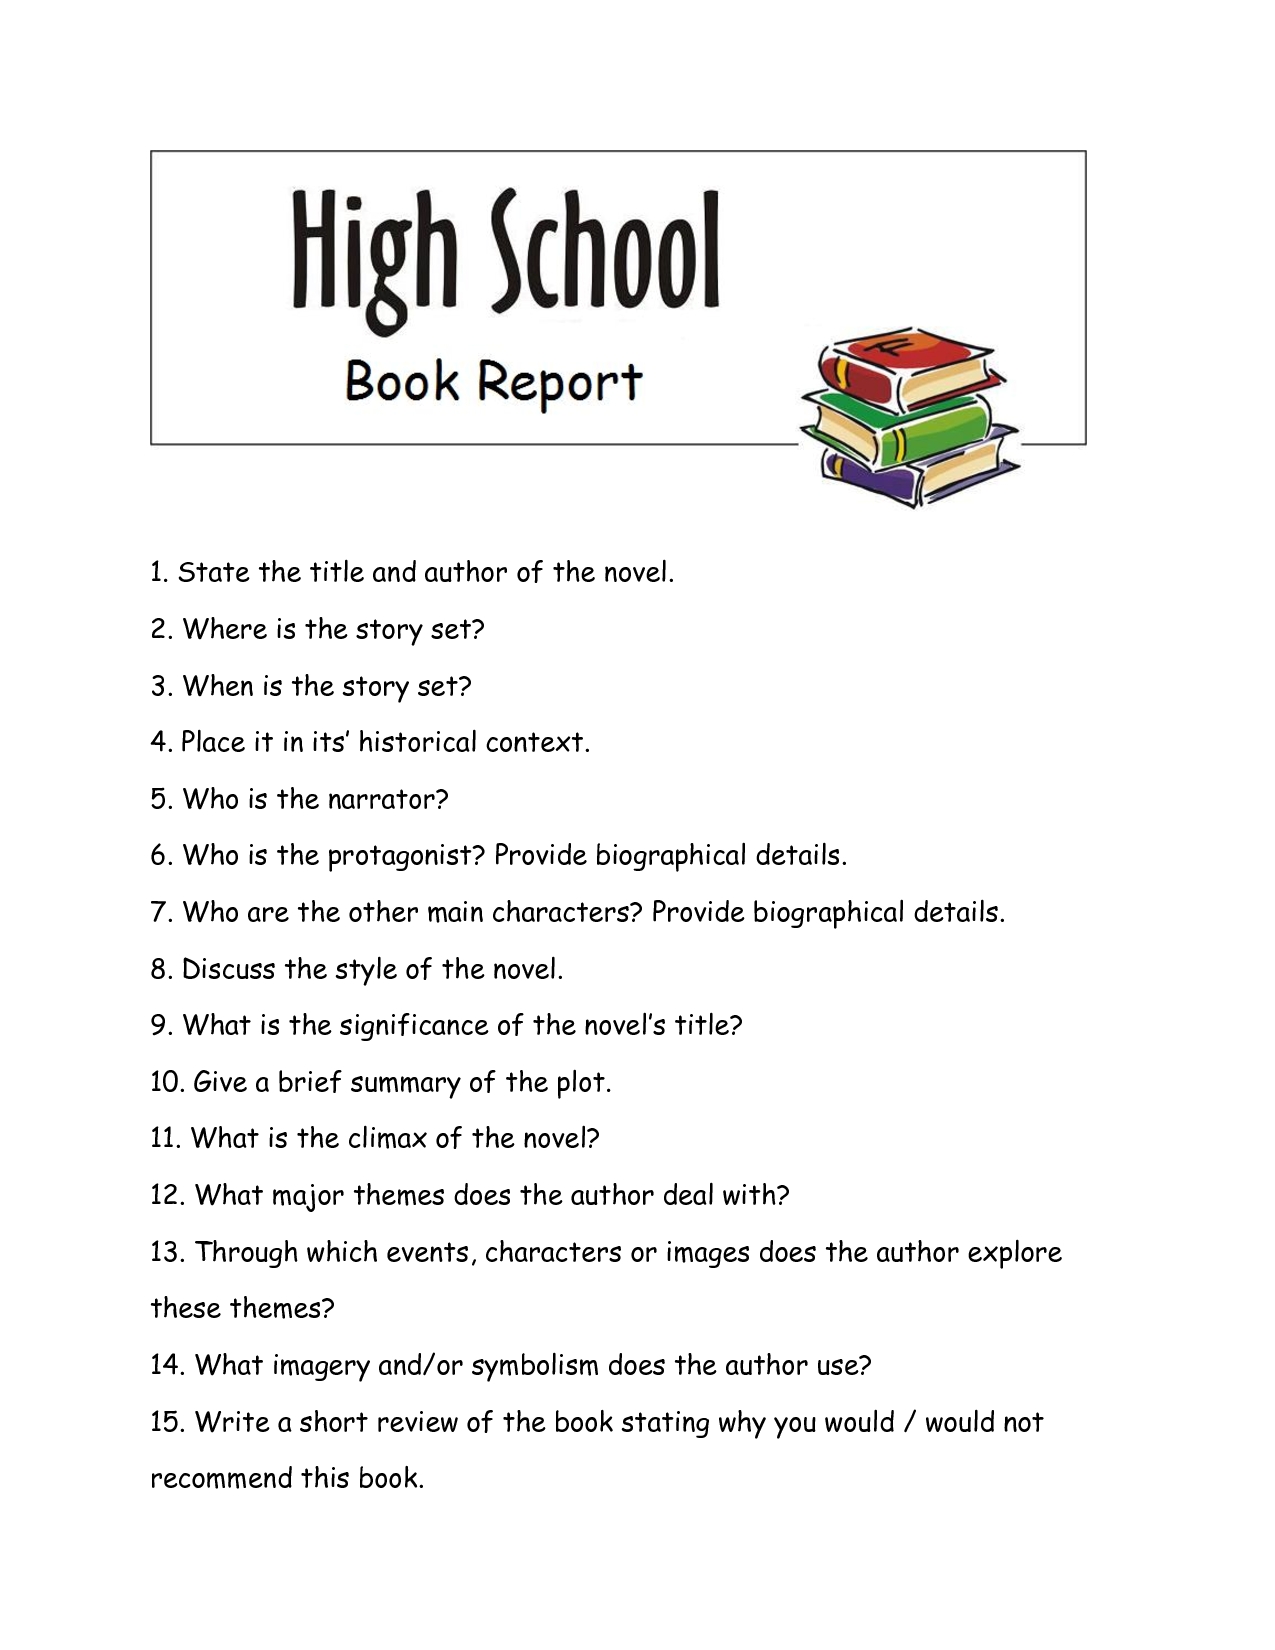 10 Awesome High School Book Report Ideas brilliant ideas of book report english high school example 2022